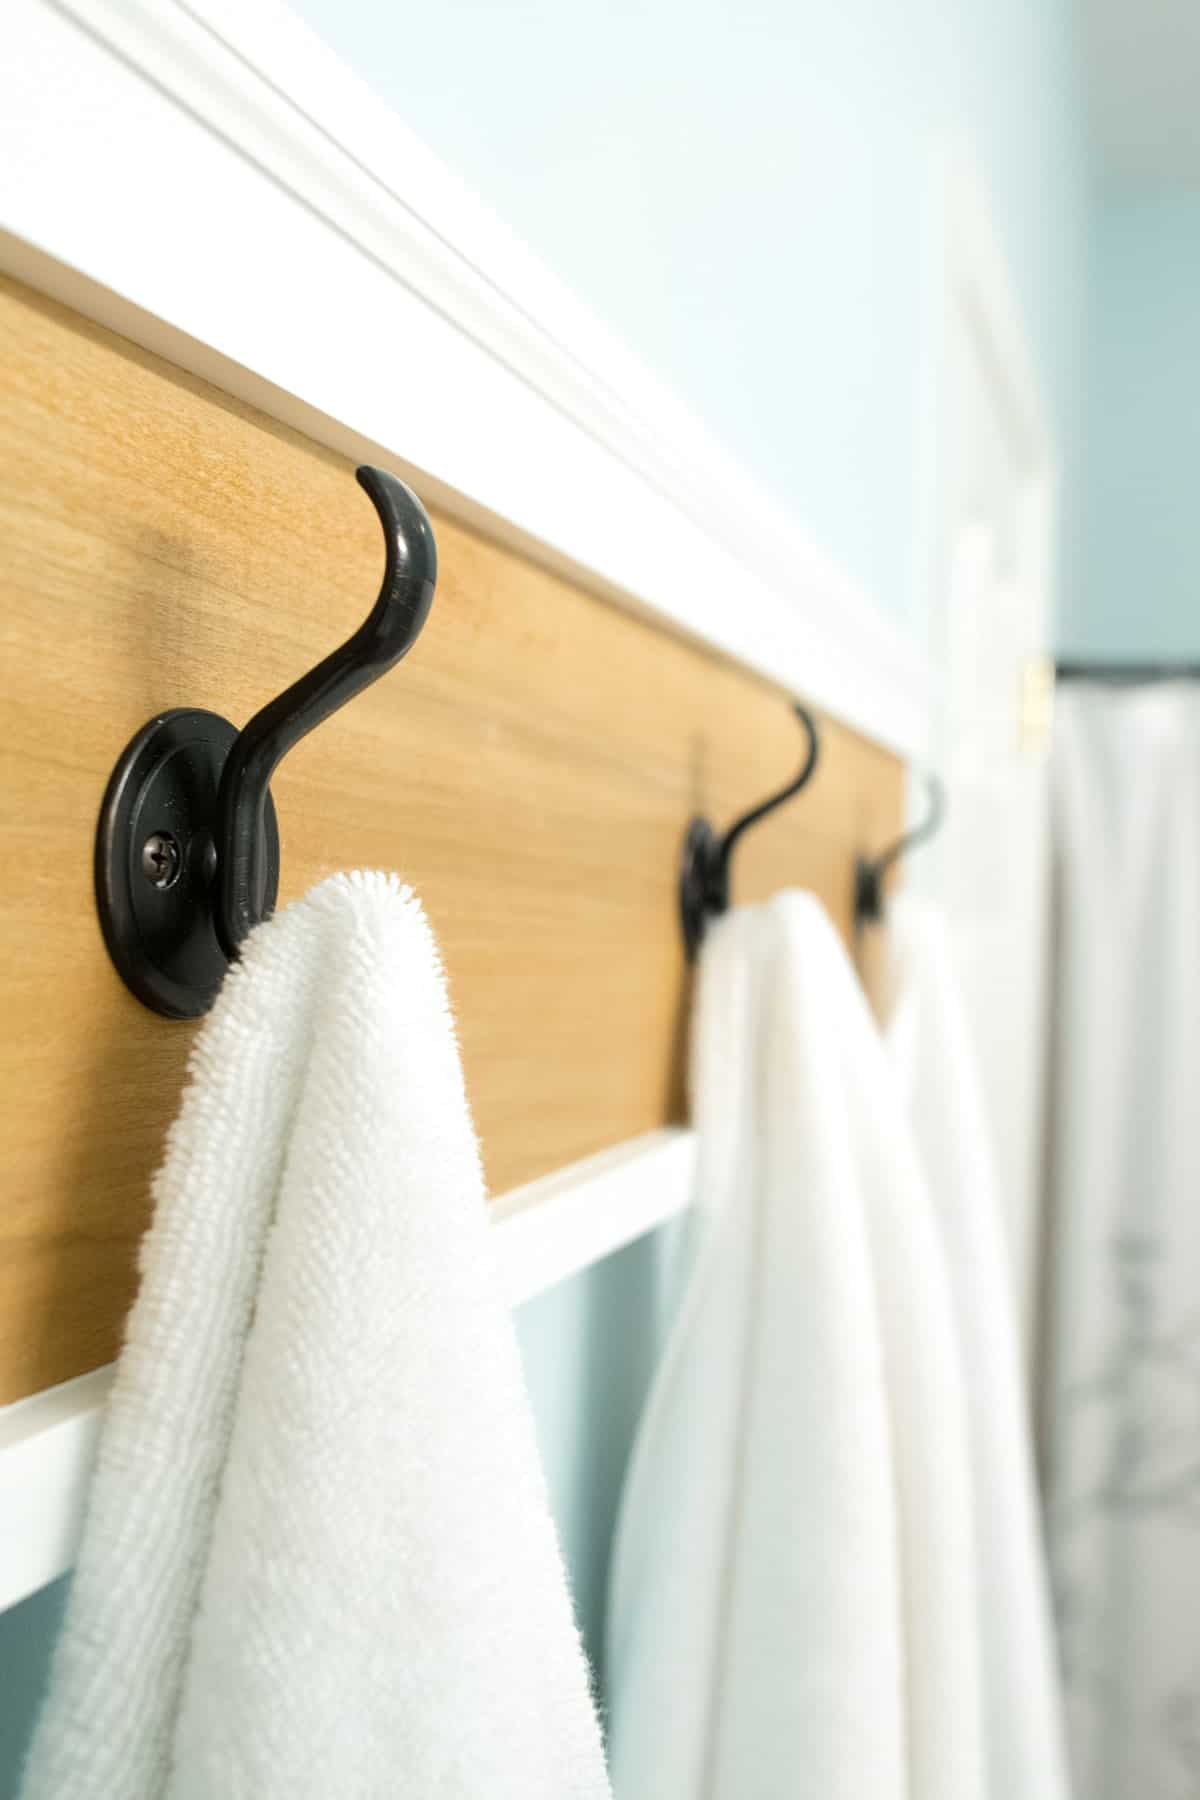 Natural wood towel rack with white molding and black metal hooks mounted on bathroom wall. 